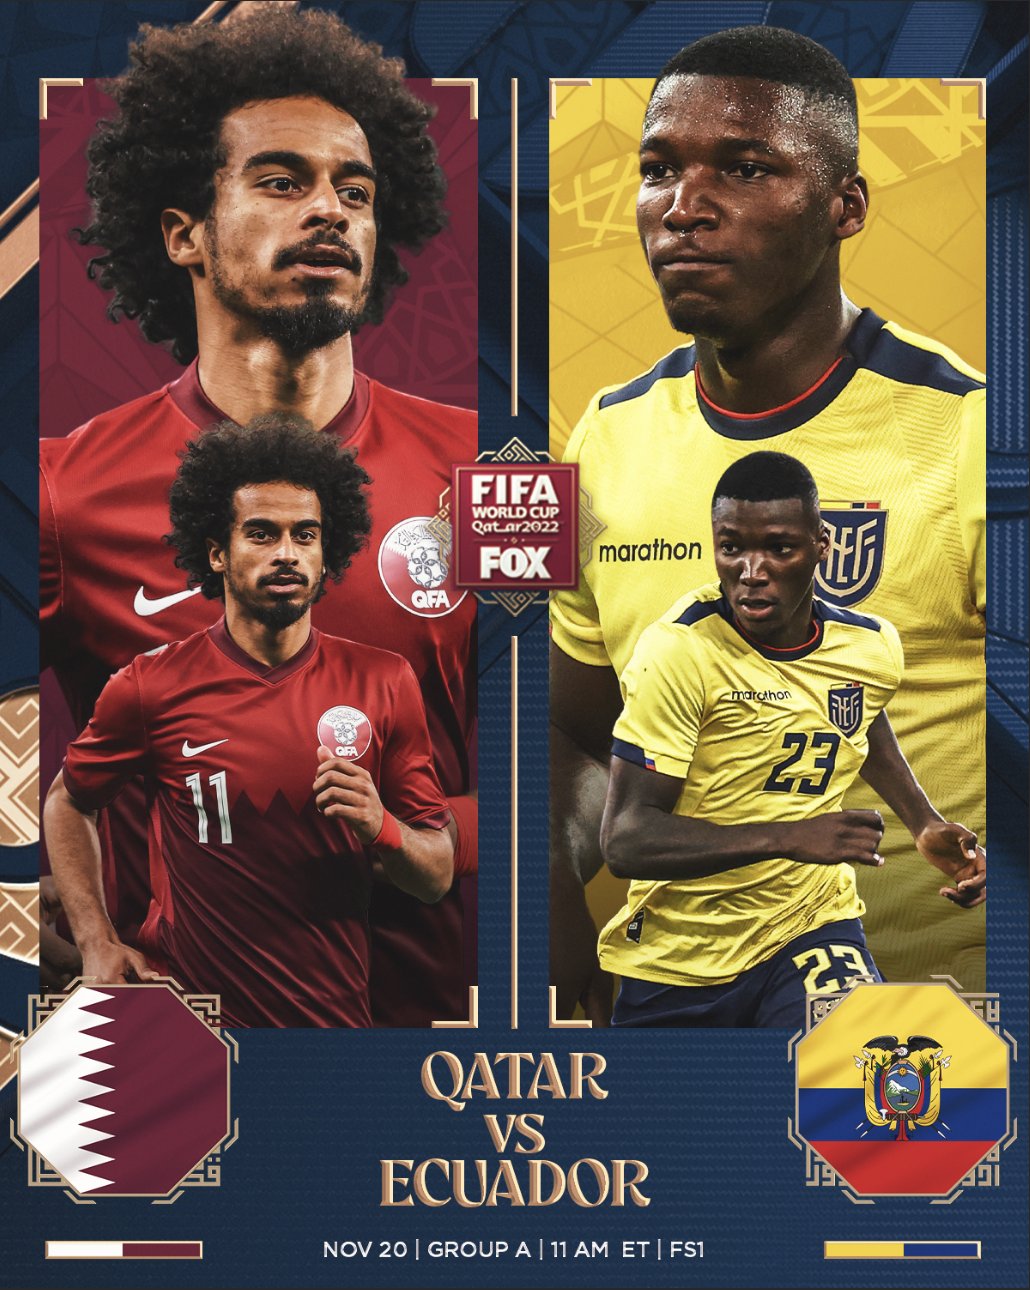 FOX Soccer on X: "The first game of the FIFA World Cup is ALMOST here! 🤩⌛️  Who are you rolling with: Qatar or Ecuador? 🇶🇦🇪🇨  https://t.co/ApatW41Rcx" / X